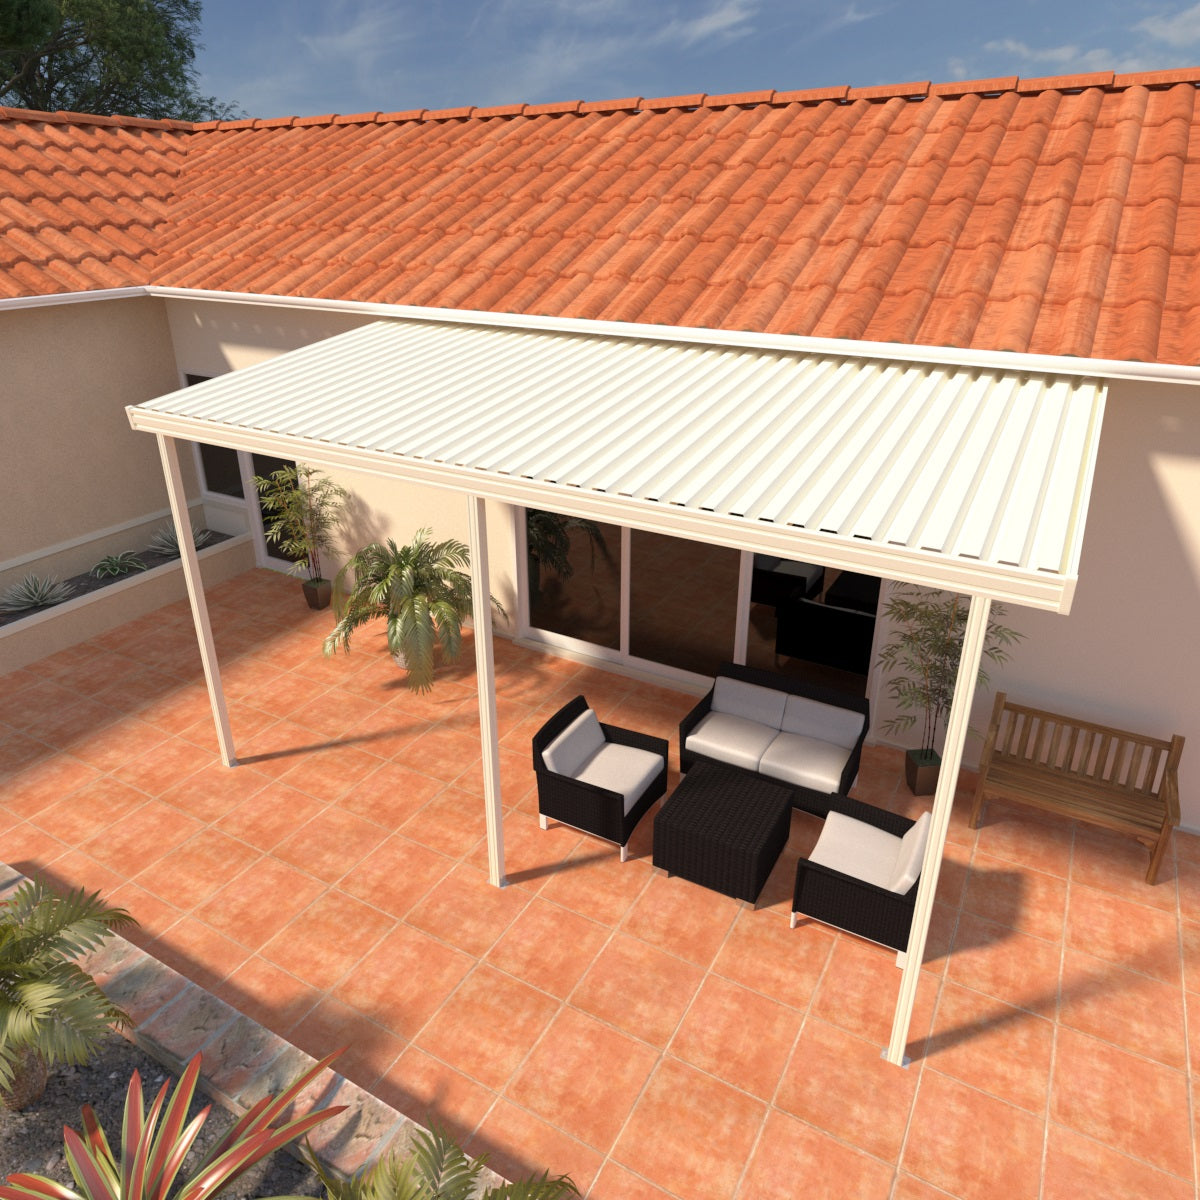 08 ft. Deep x 12 ft. Wide Ivory Attached Aluminum Patio Cover - 3 Posts - (30lb Medium/High Snow Area)